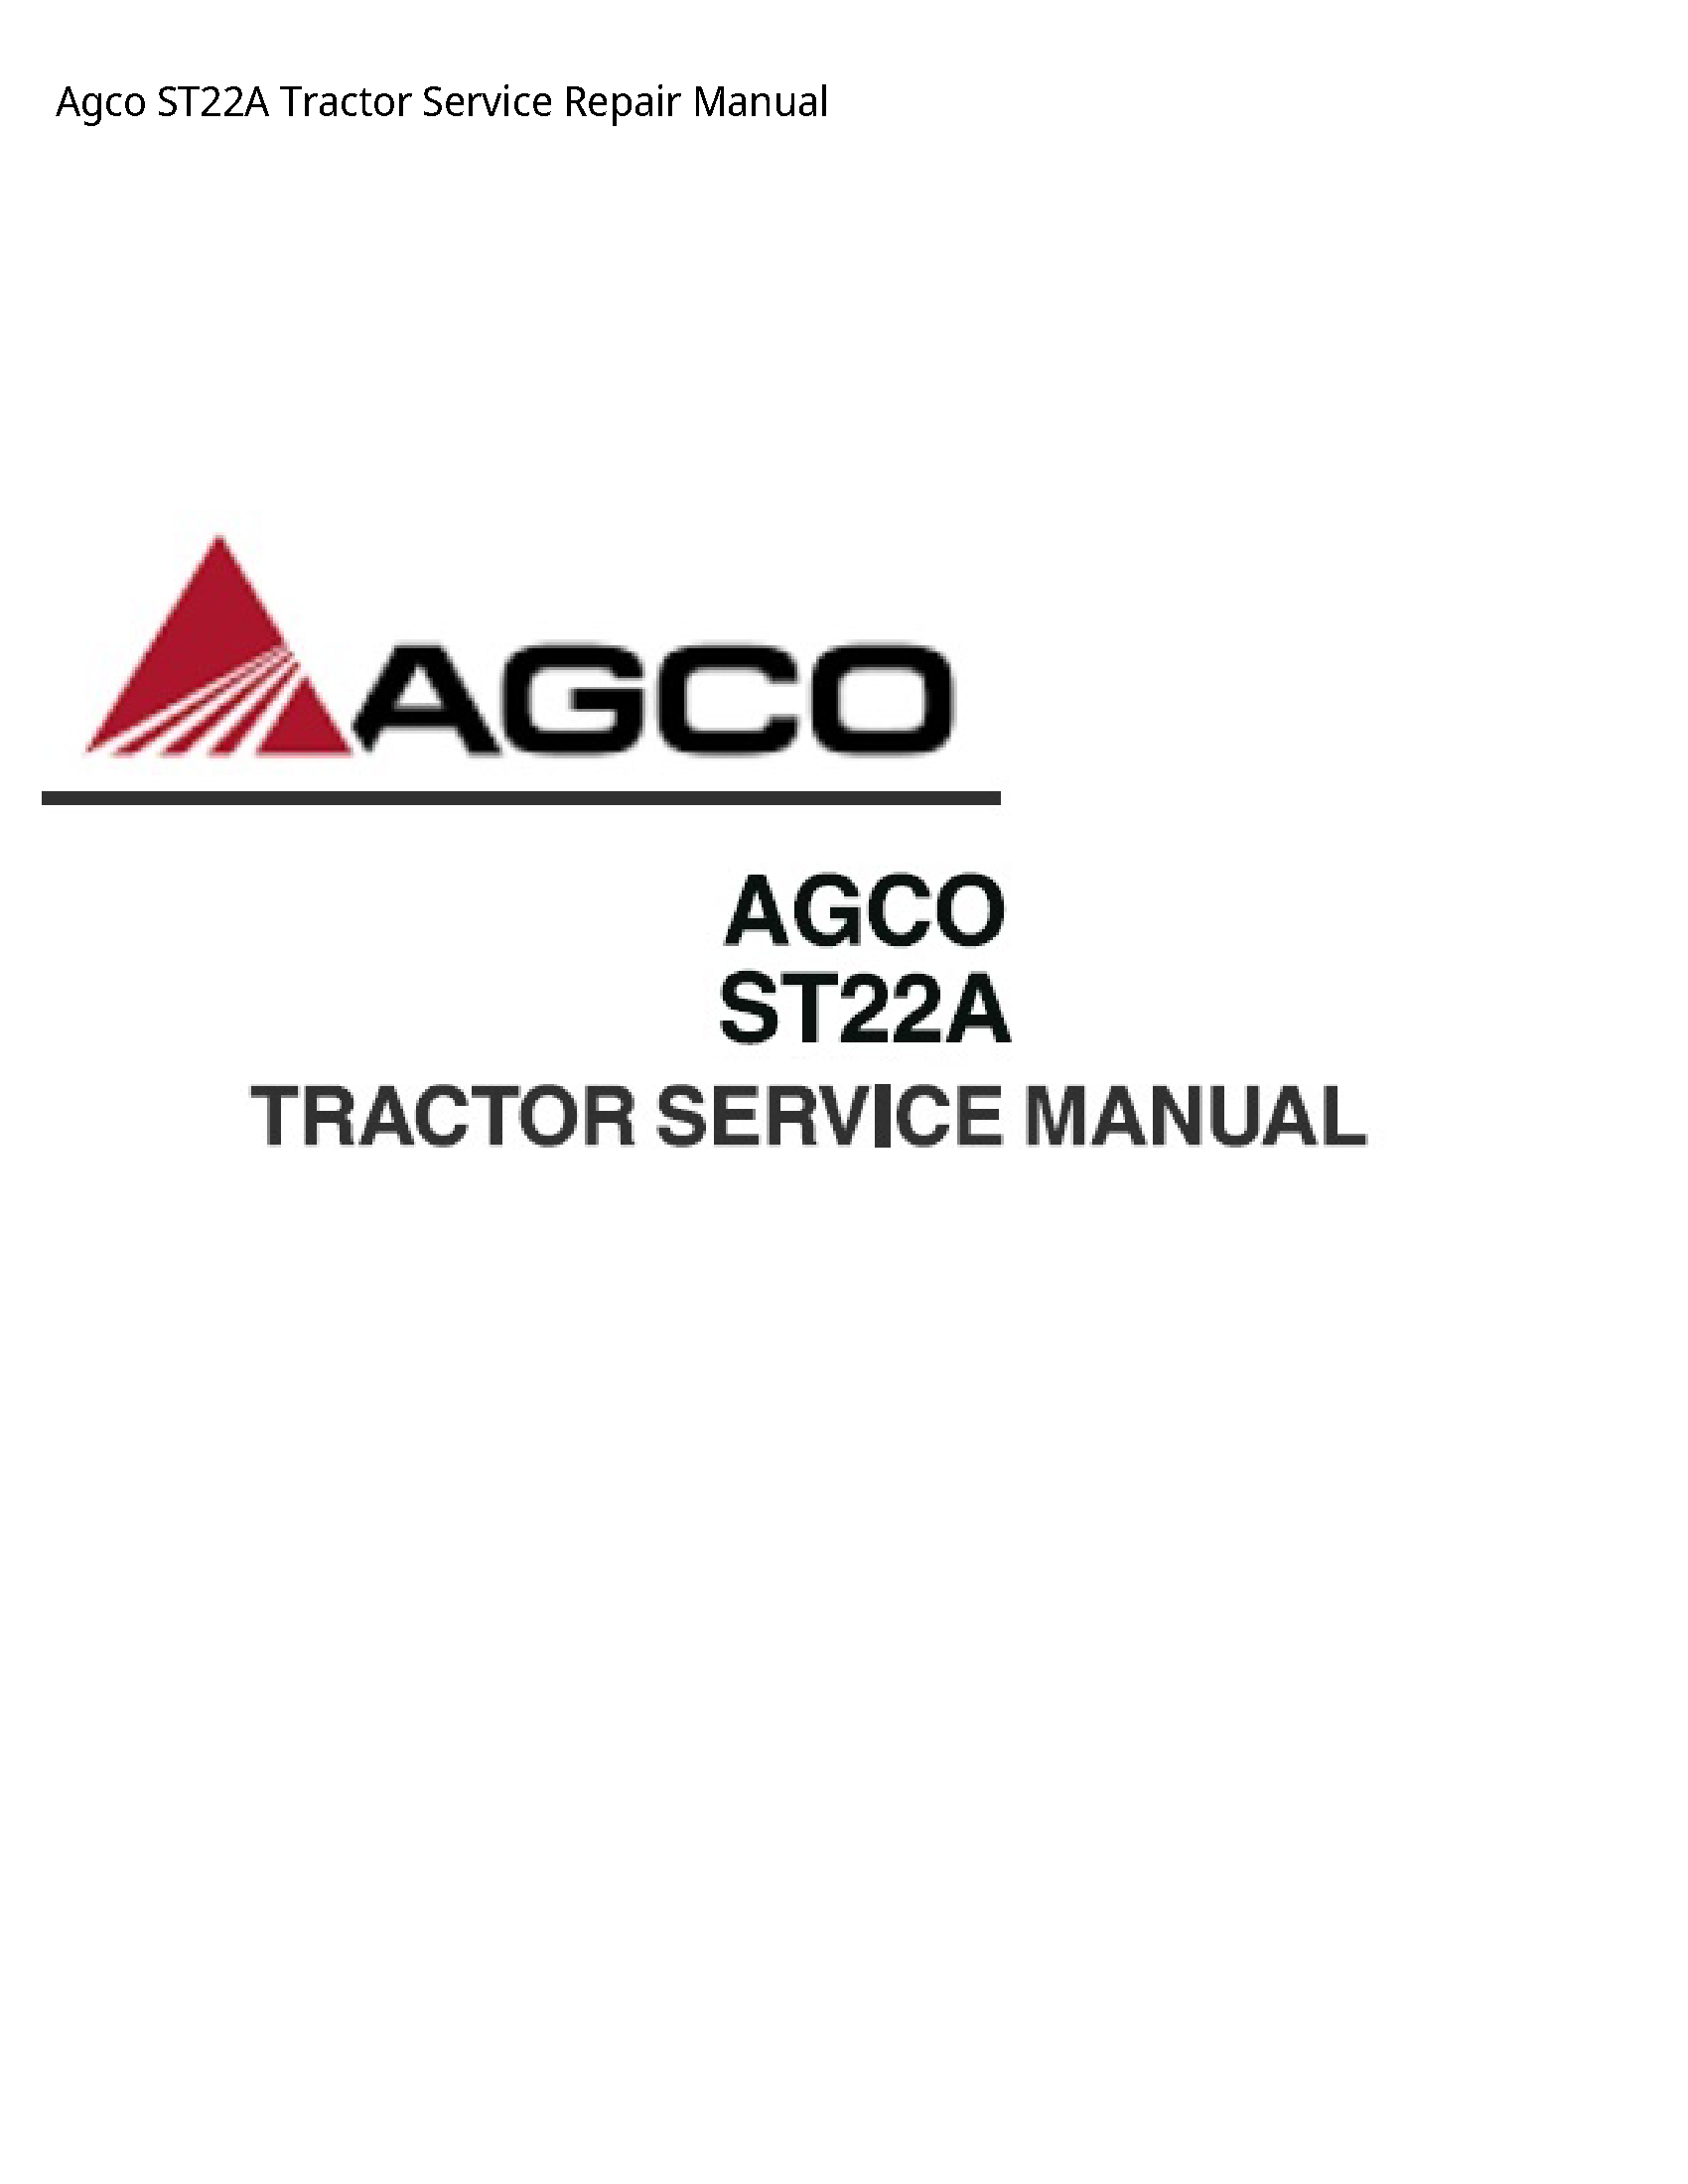 AGCO ST22A Tractor manual